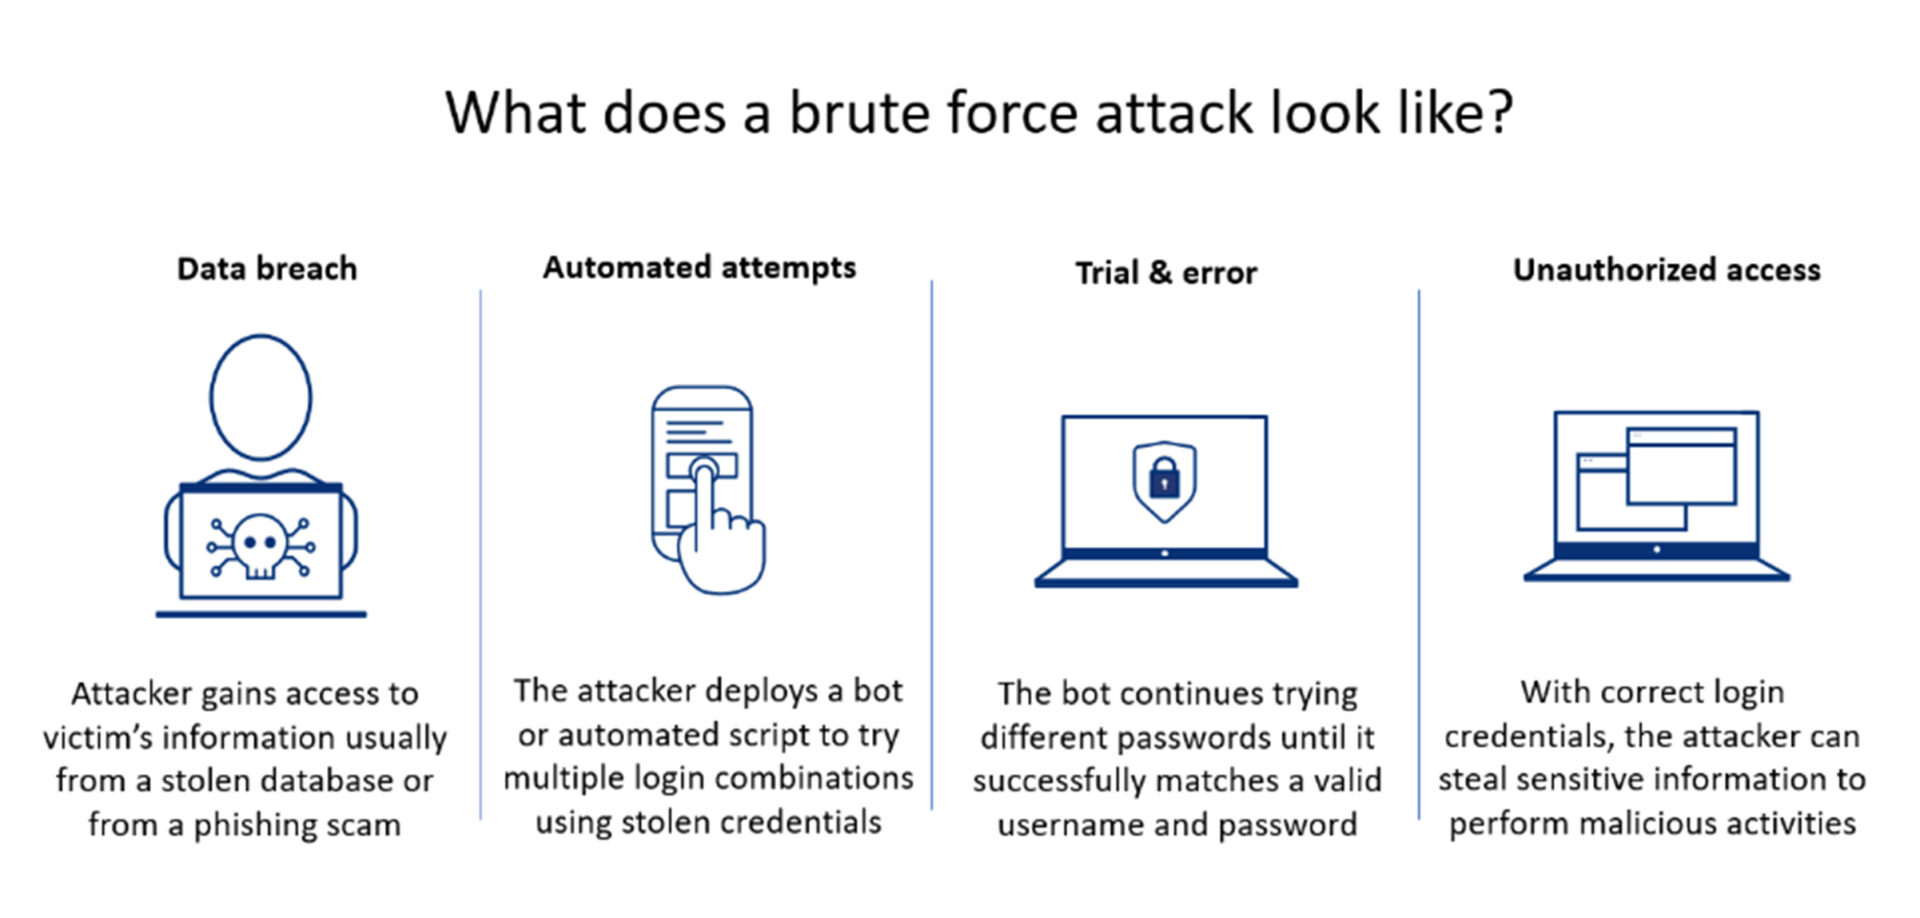 What does a brute force attack look like? Data breach, Automated attempts, Trial & error, Unauthorized access